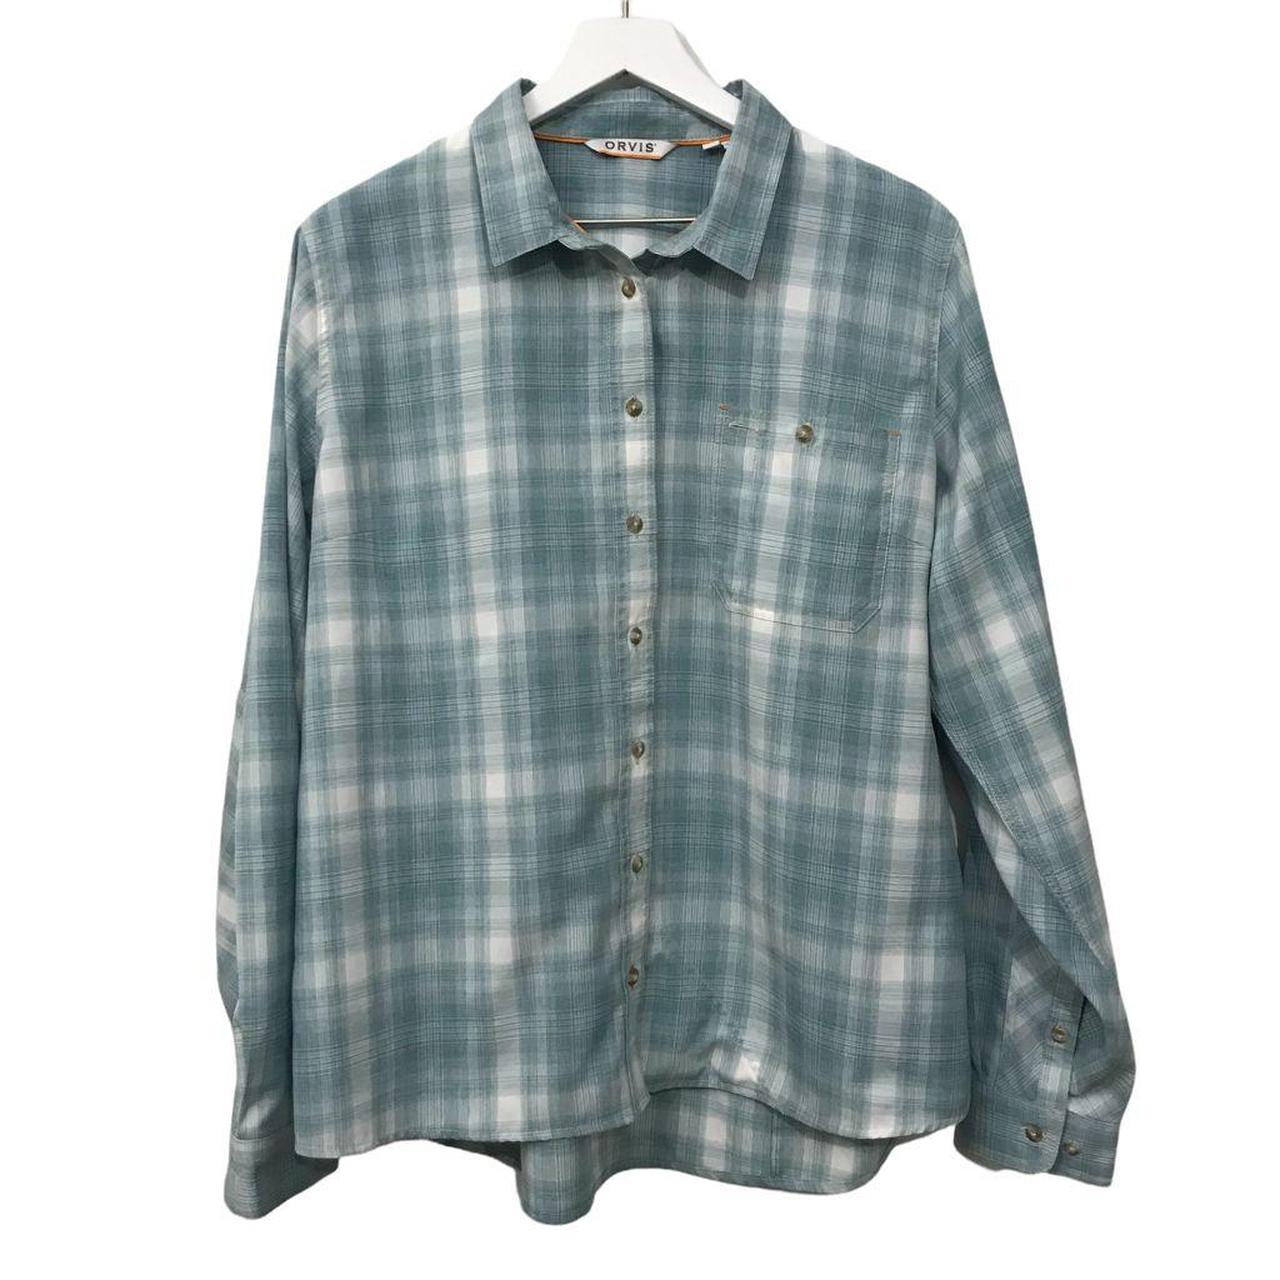 Product Image 1 - Mens button up long sleeve